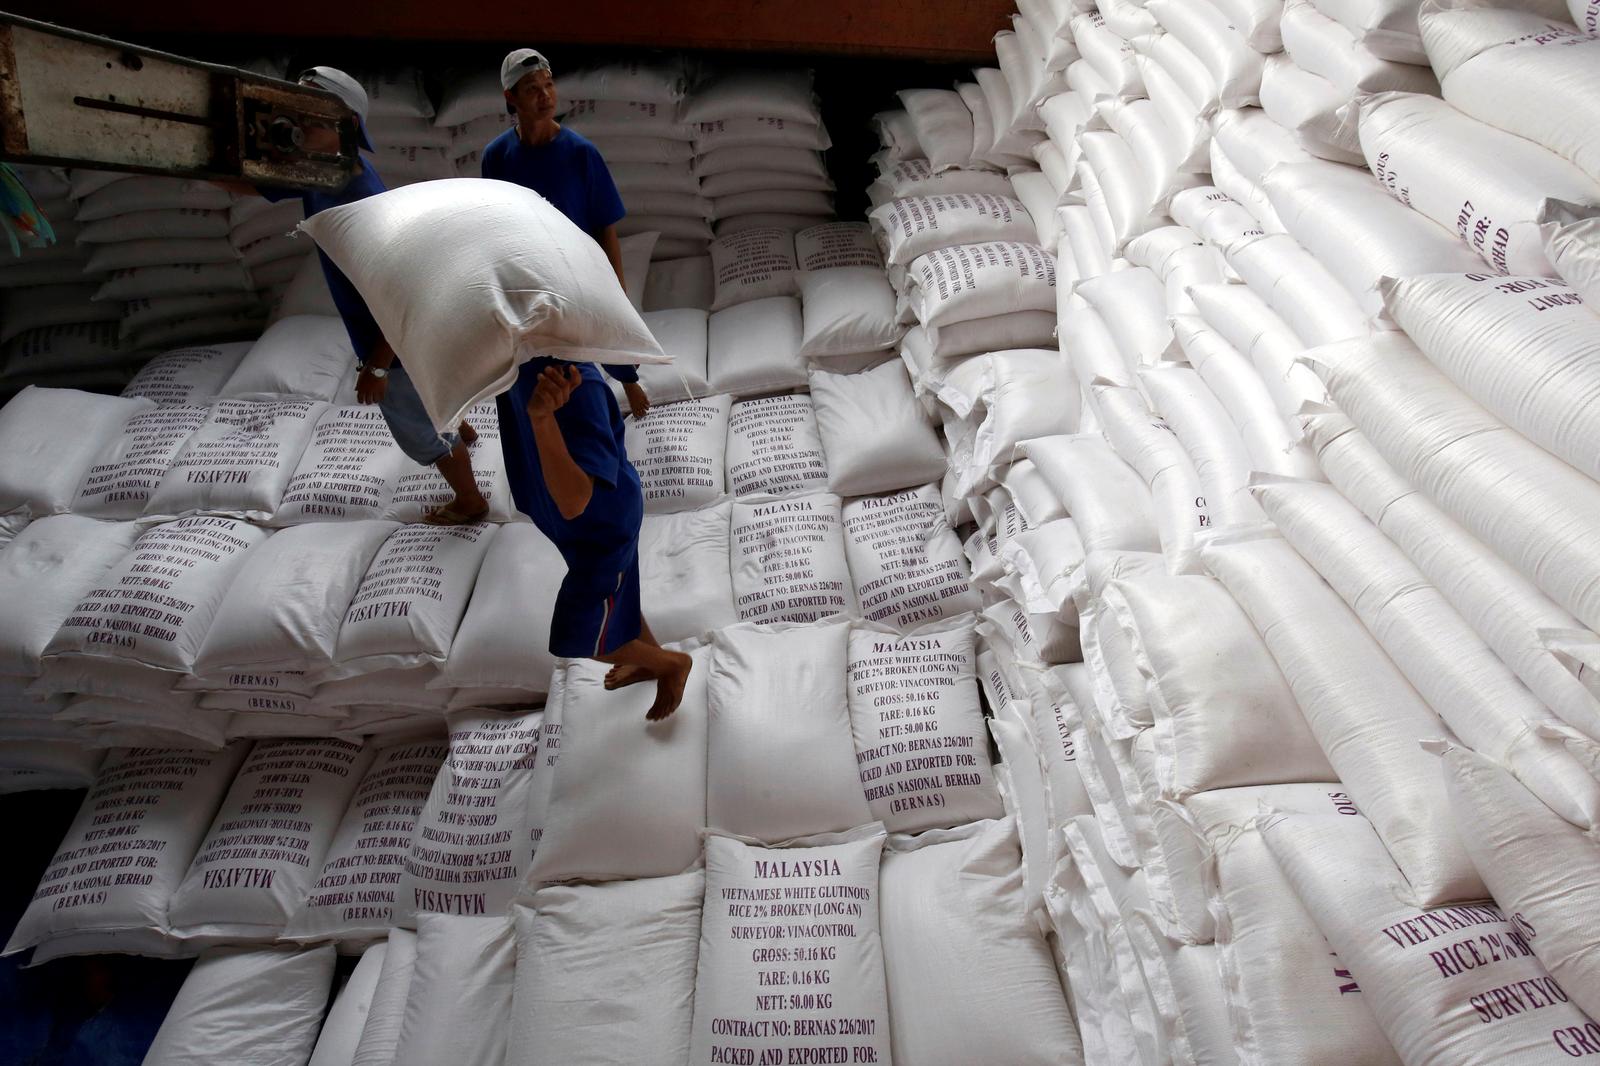 Asia rice-Thai prices hit 6-month high, Vietnam rates elevated on supply woes